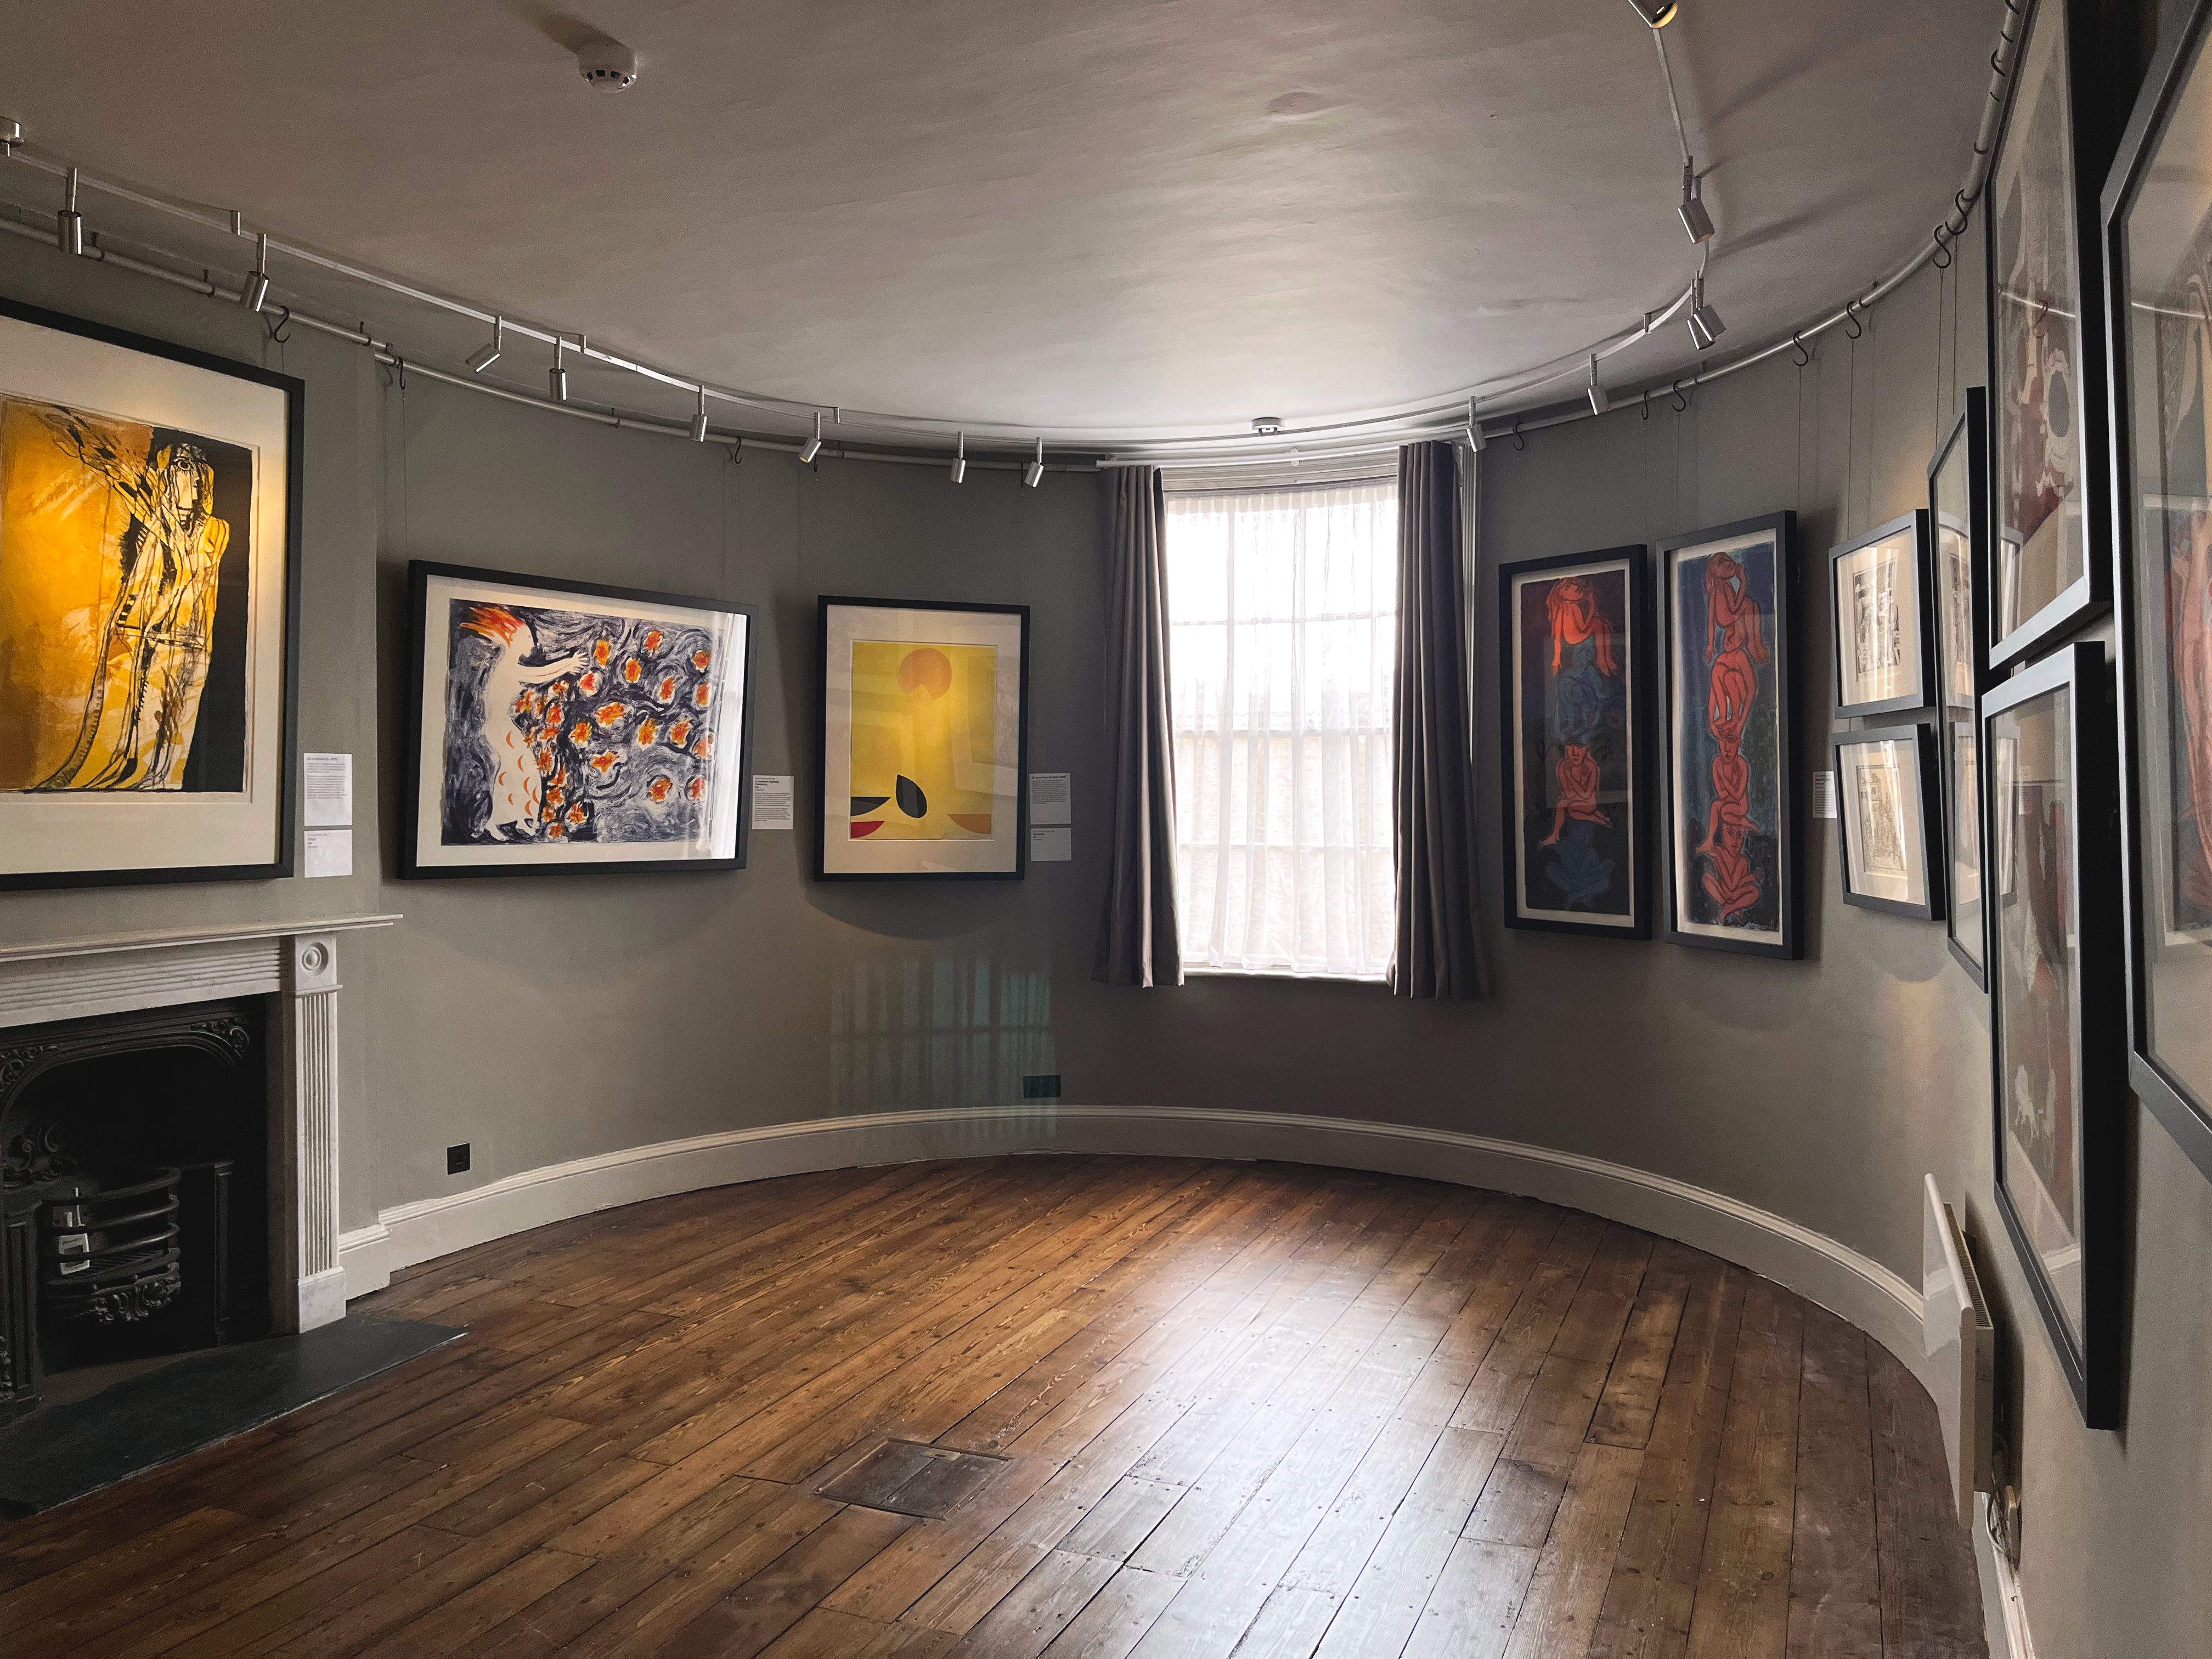 An image taken of the Striking Editions lithograph exhibition. There are numerous prints framed on the walls. The Upper Bow Room has a rounded back wall.